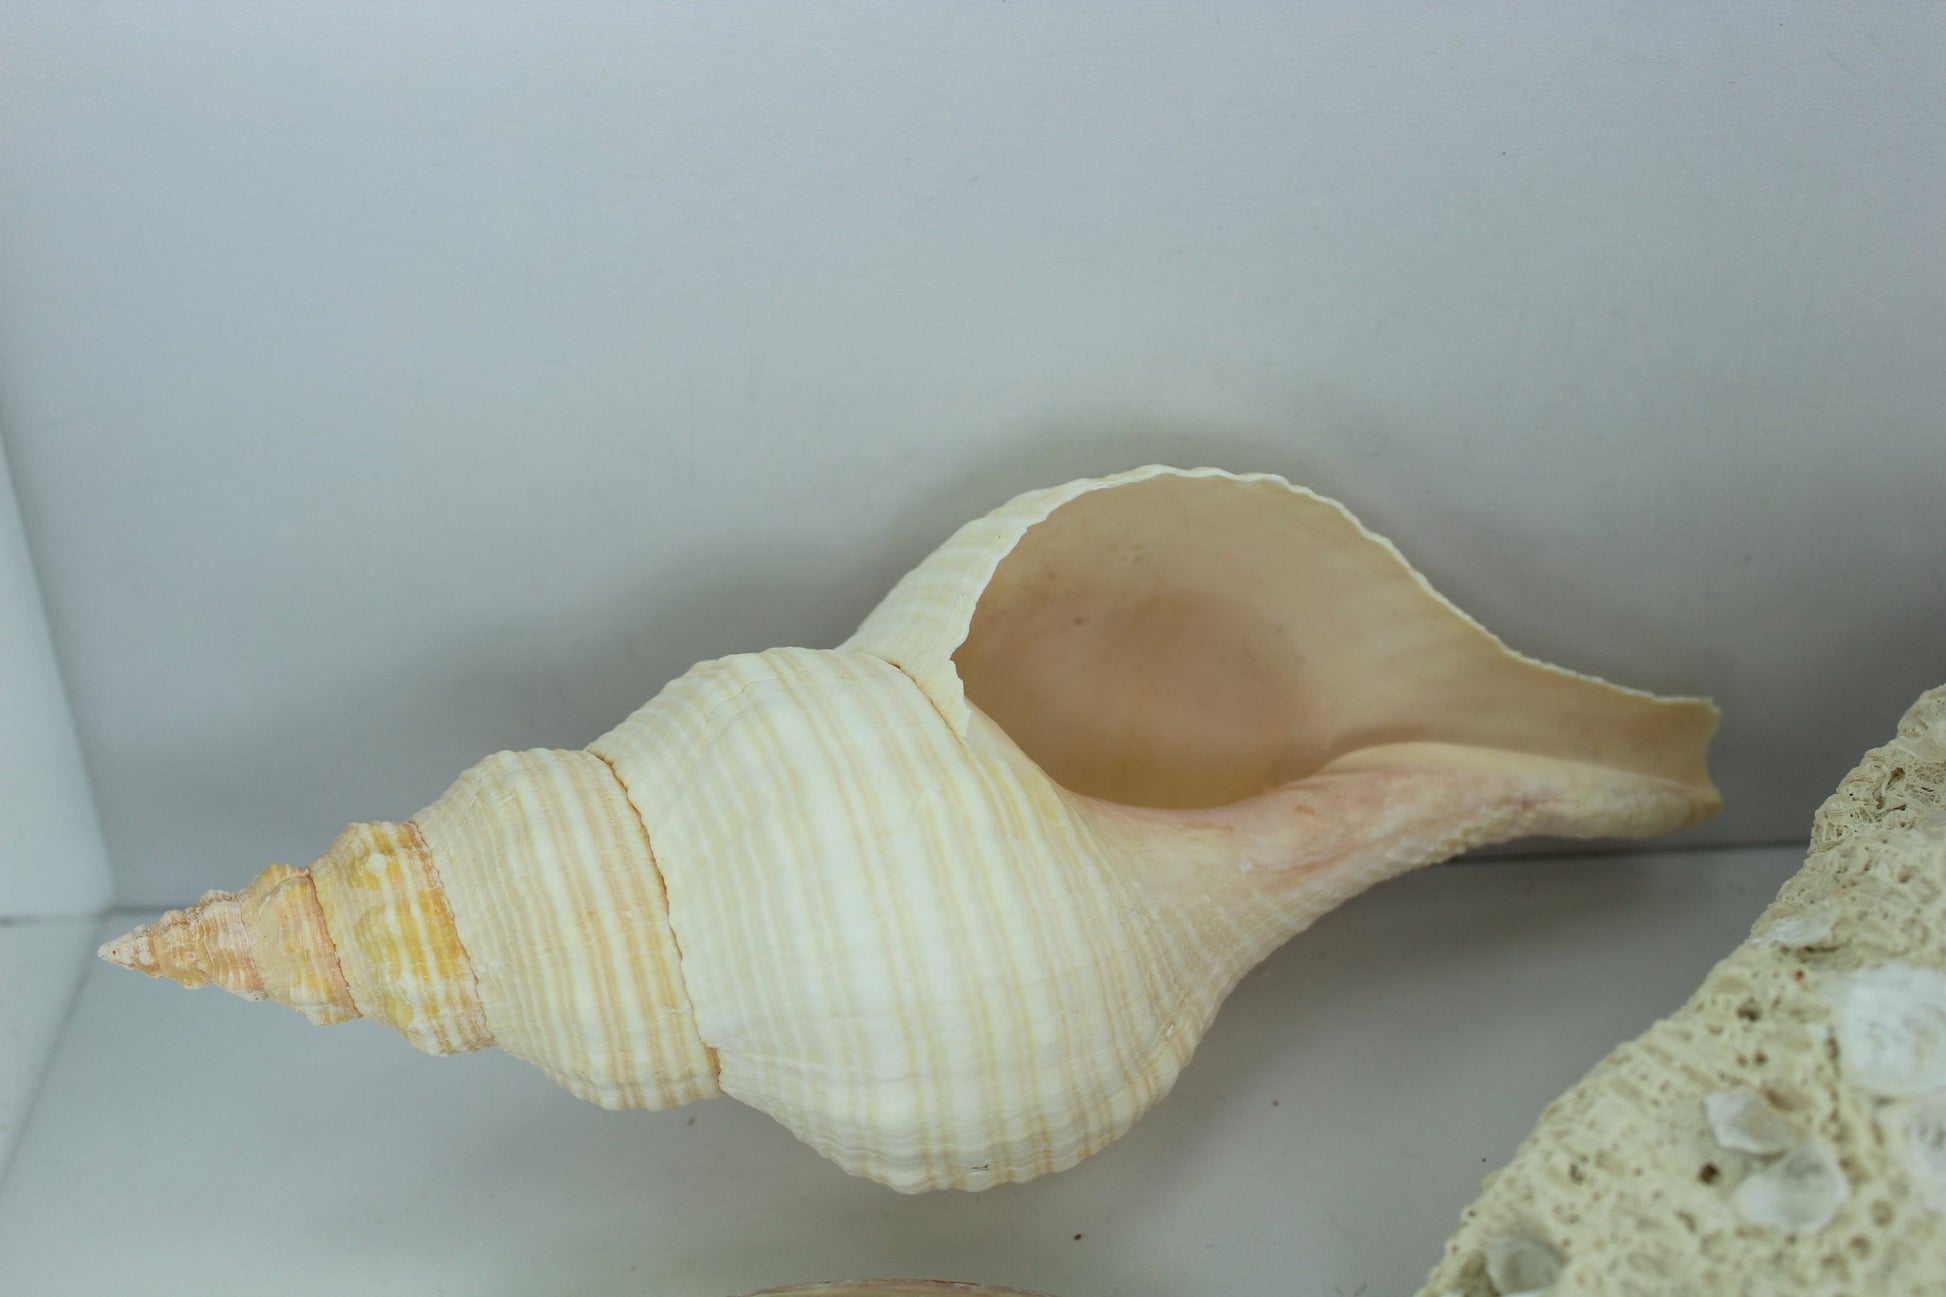 Florida Natural Shells Coral Horse Conch Red Abalone Vintage Estate CollectiomShell Art specimen